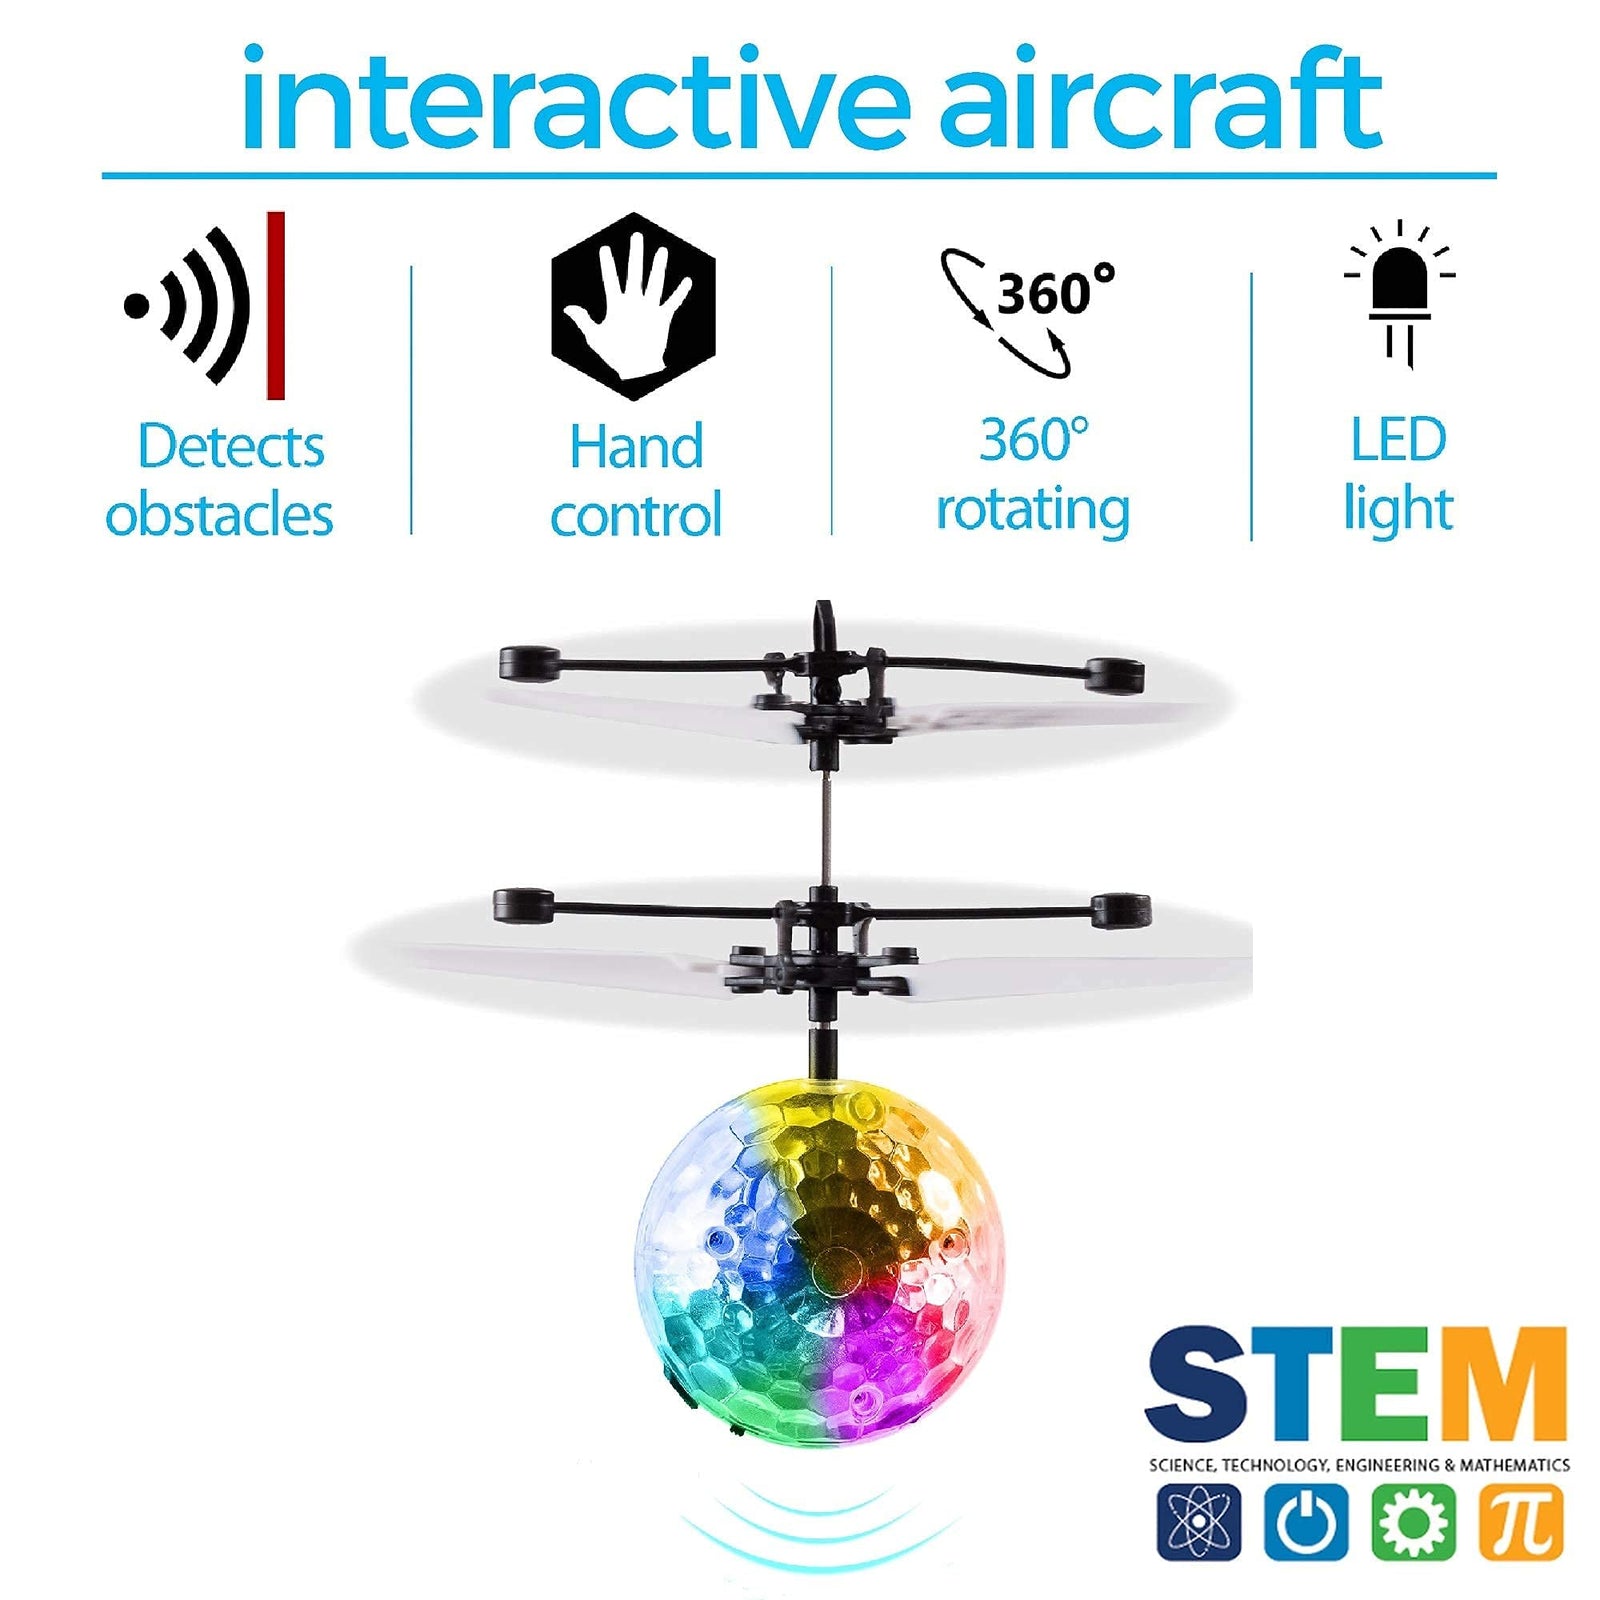 Magic Flying Ball Toy - Infrared Induction RC Drone, Disco Light LEDs, Rechargeable Helicopter - Unique Kids & Adults Christmas Stocking Stuffer Idea 2021, Best Teenage Girl, Teen Boy & Tweens Present